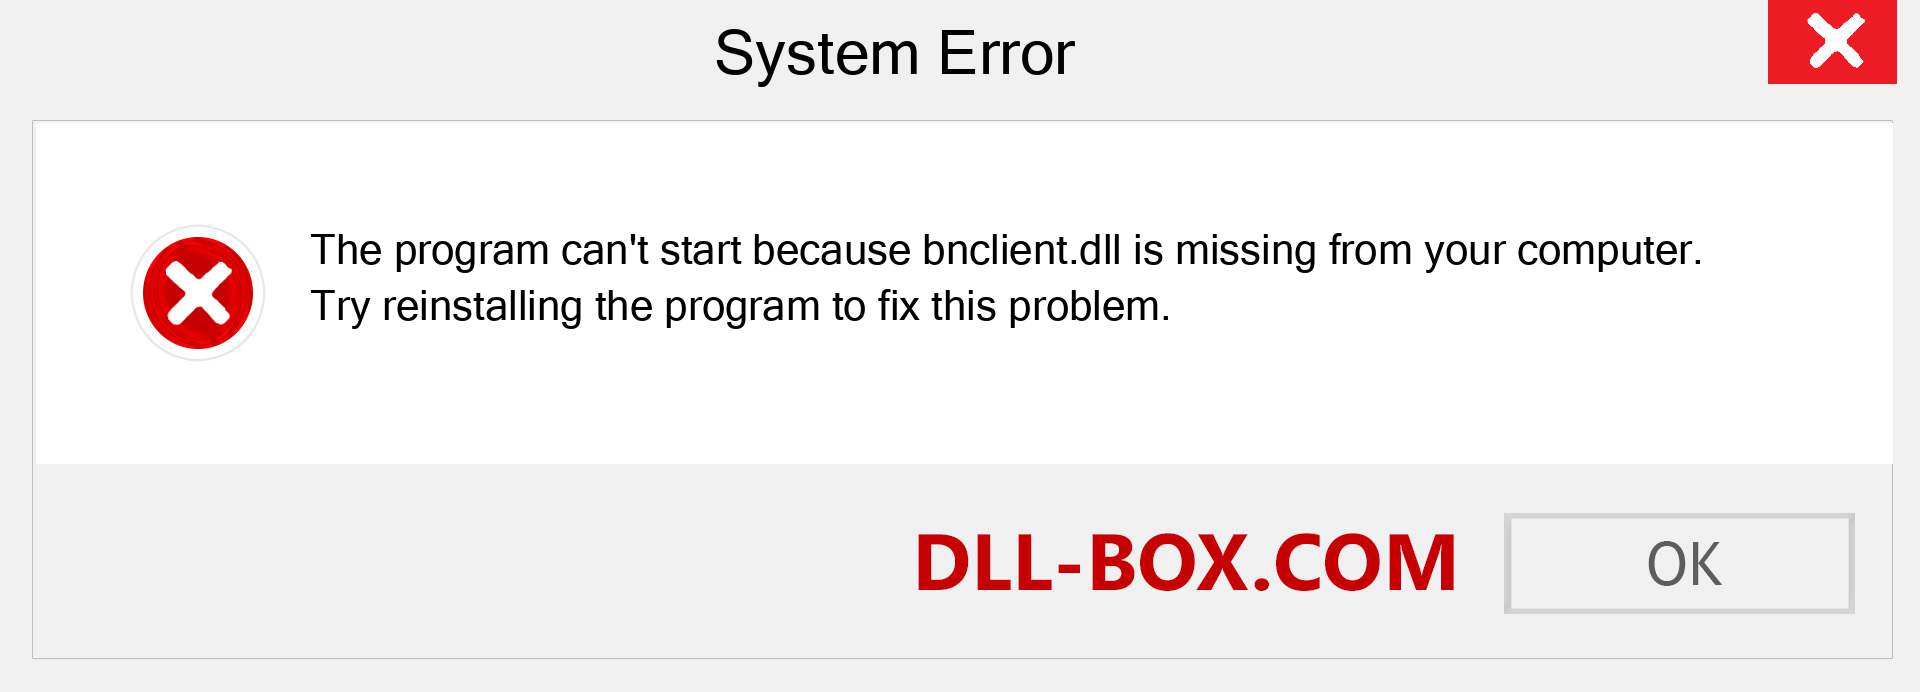  bnclient.dll file is missing?. Download for Windows 7, 8, 10 - Fix  bnclient dll Missing Error on Windows, photos, images